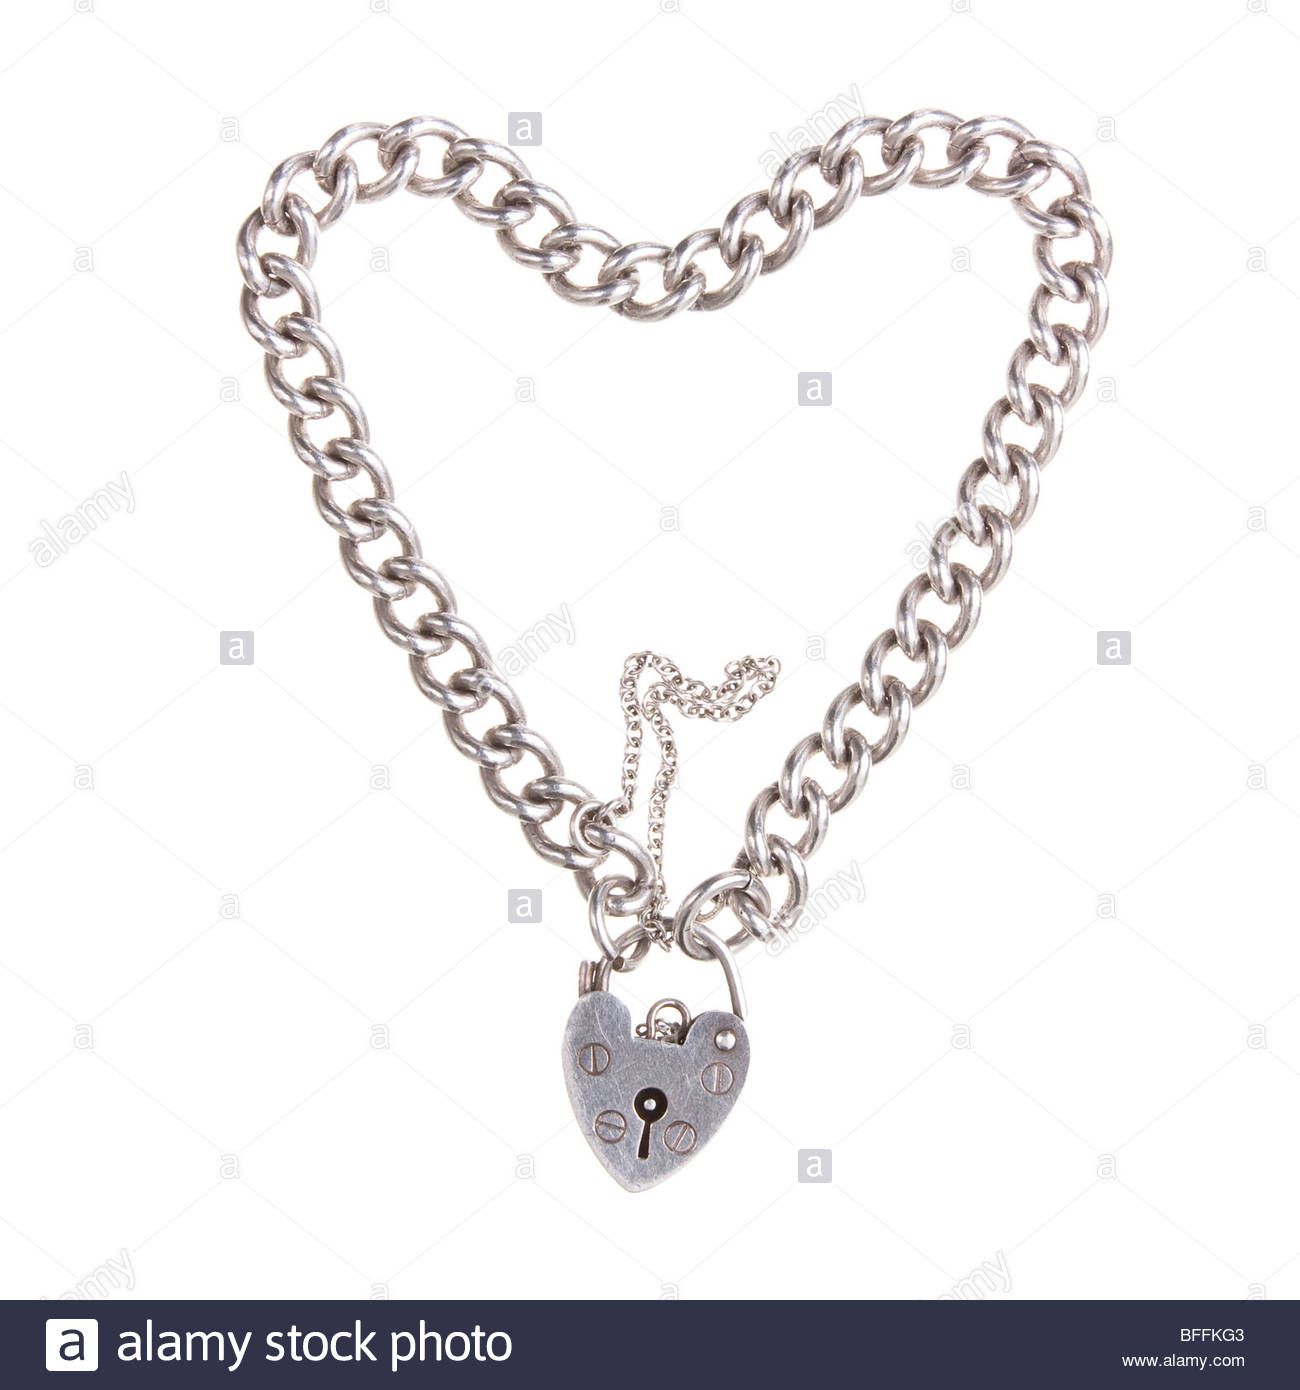 Charm Bracelet In Heart Shape With Heart Shaped Lock Against White Within Most Current Heart Shaped Padlock Necklaces (View 8 of 25)